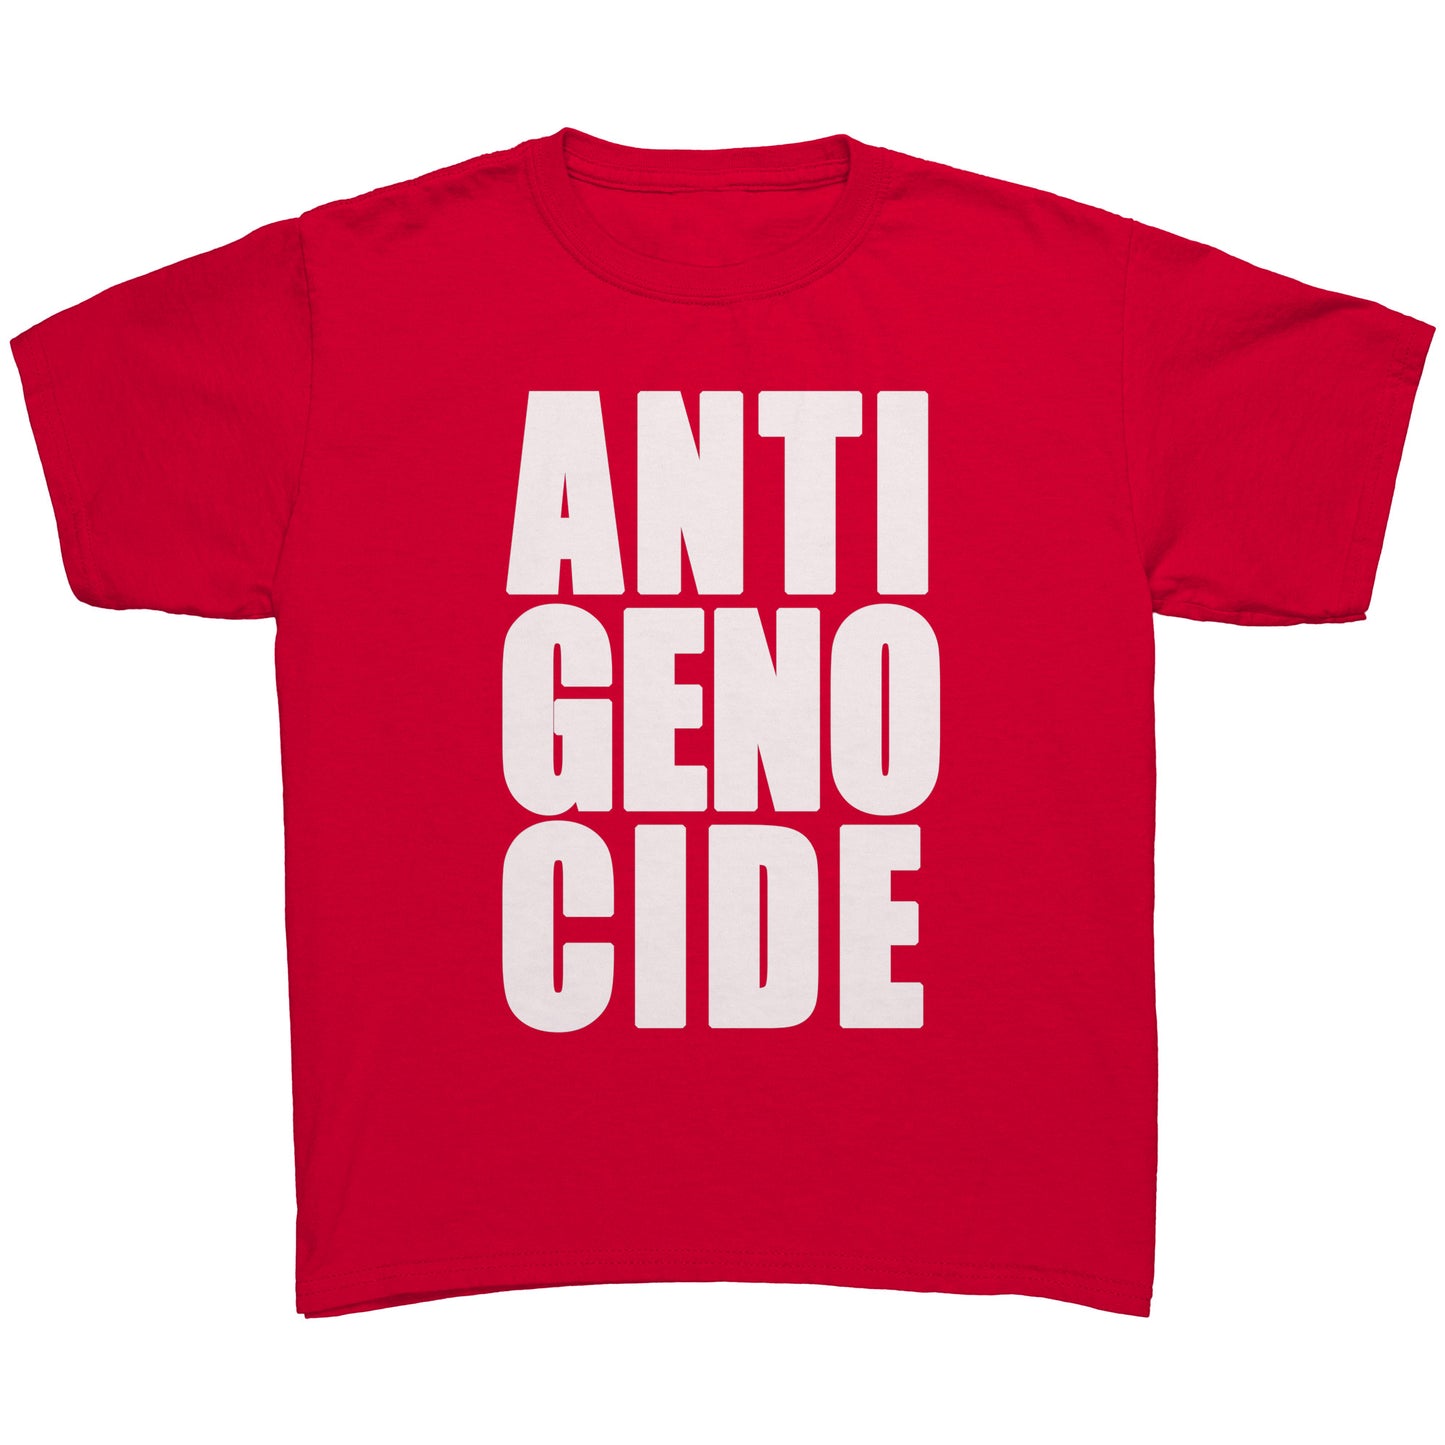 Youth Tee "Anti Genocide" (white print)